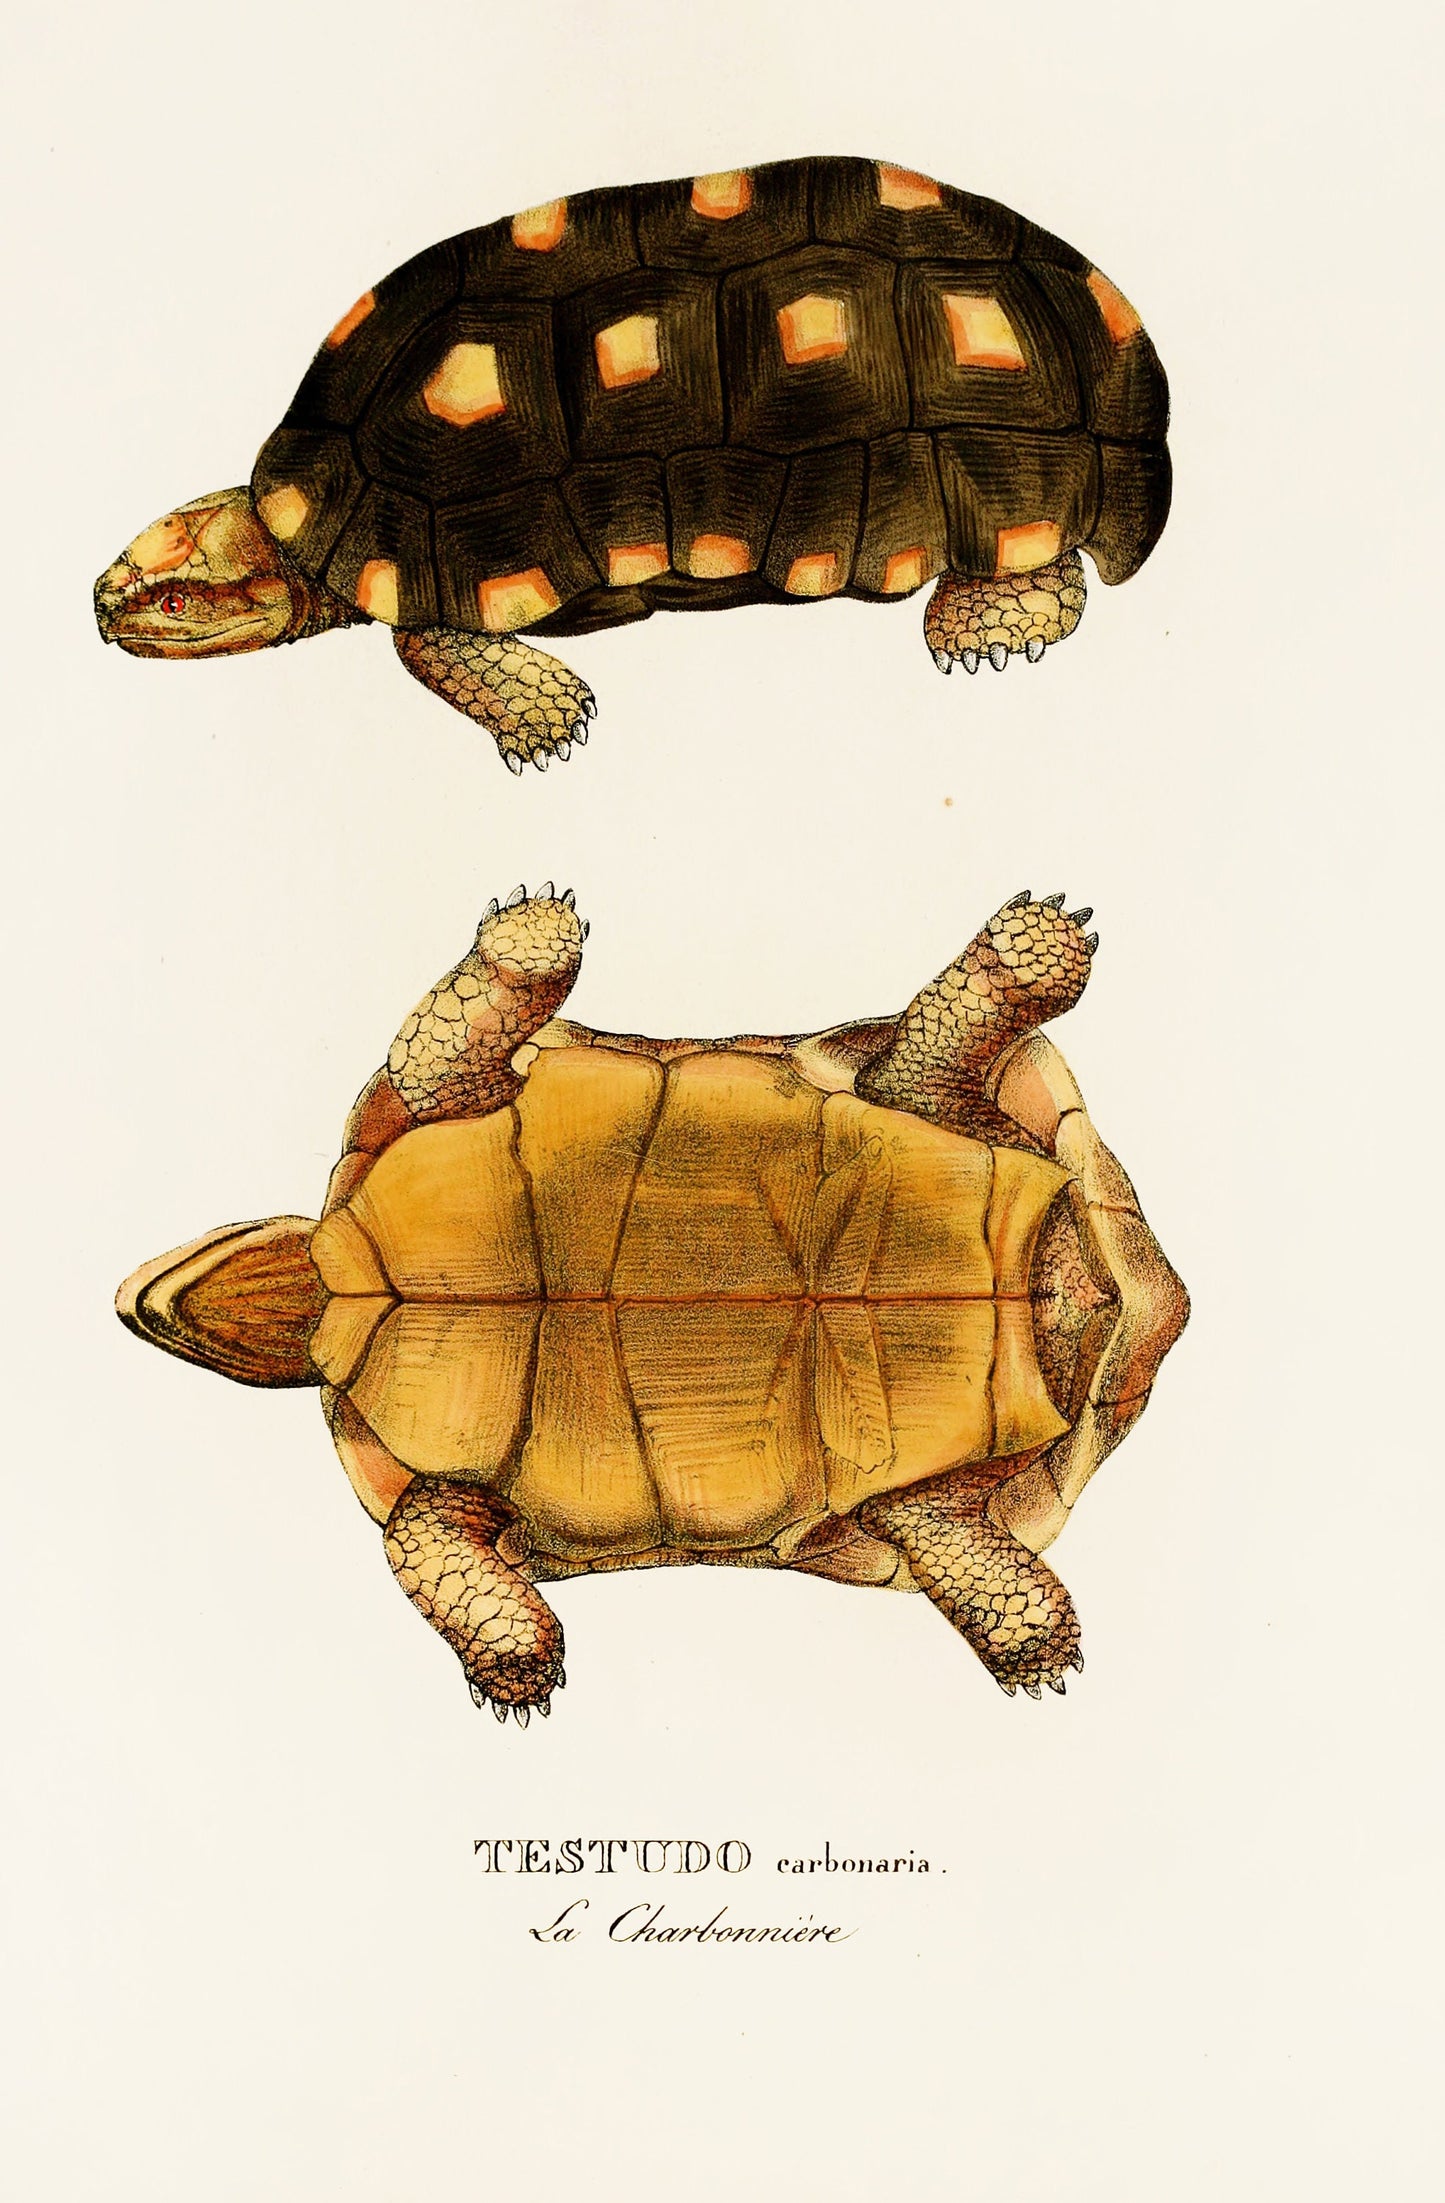 A New Species of Turtle [17 Images]